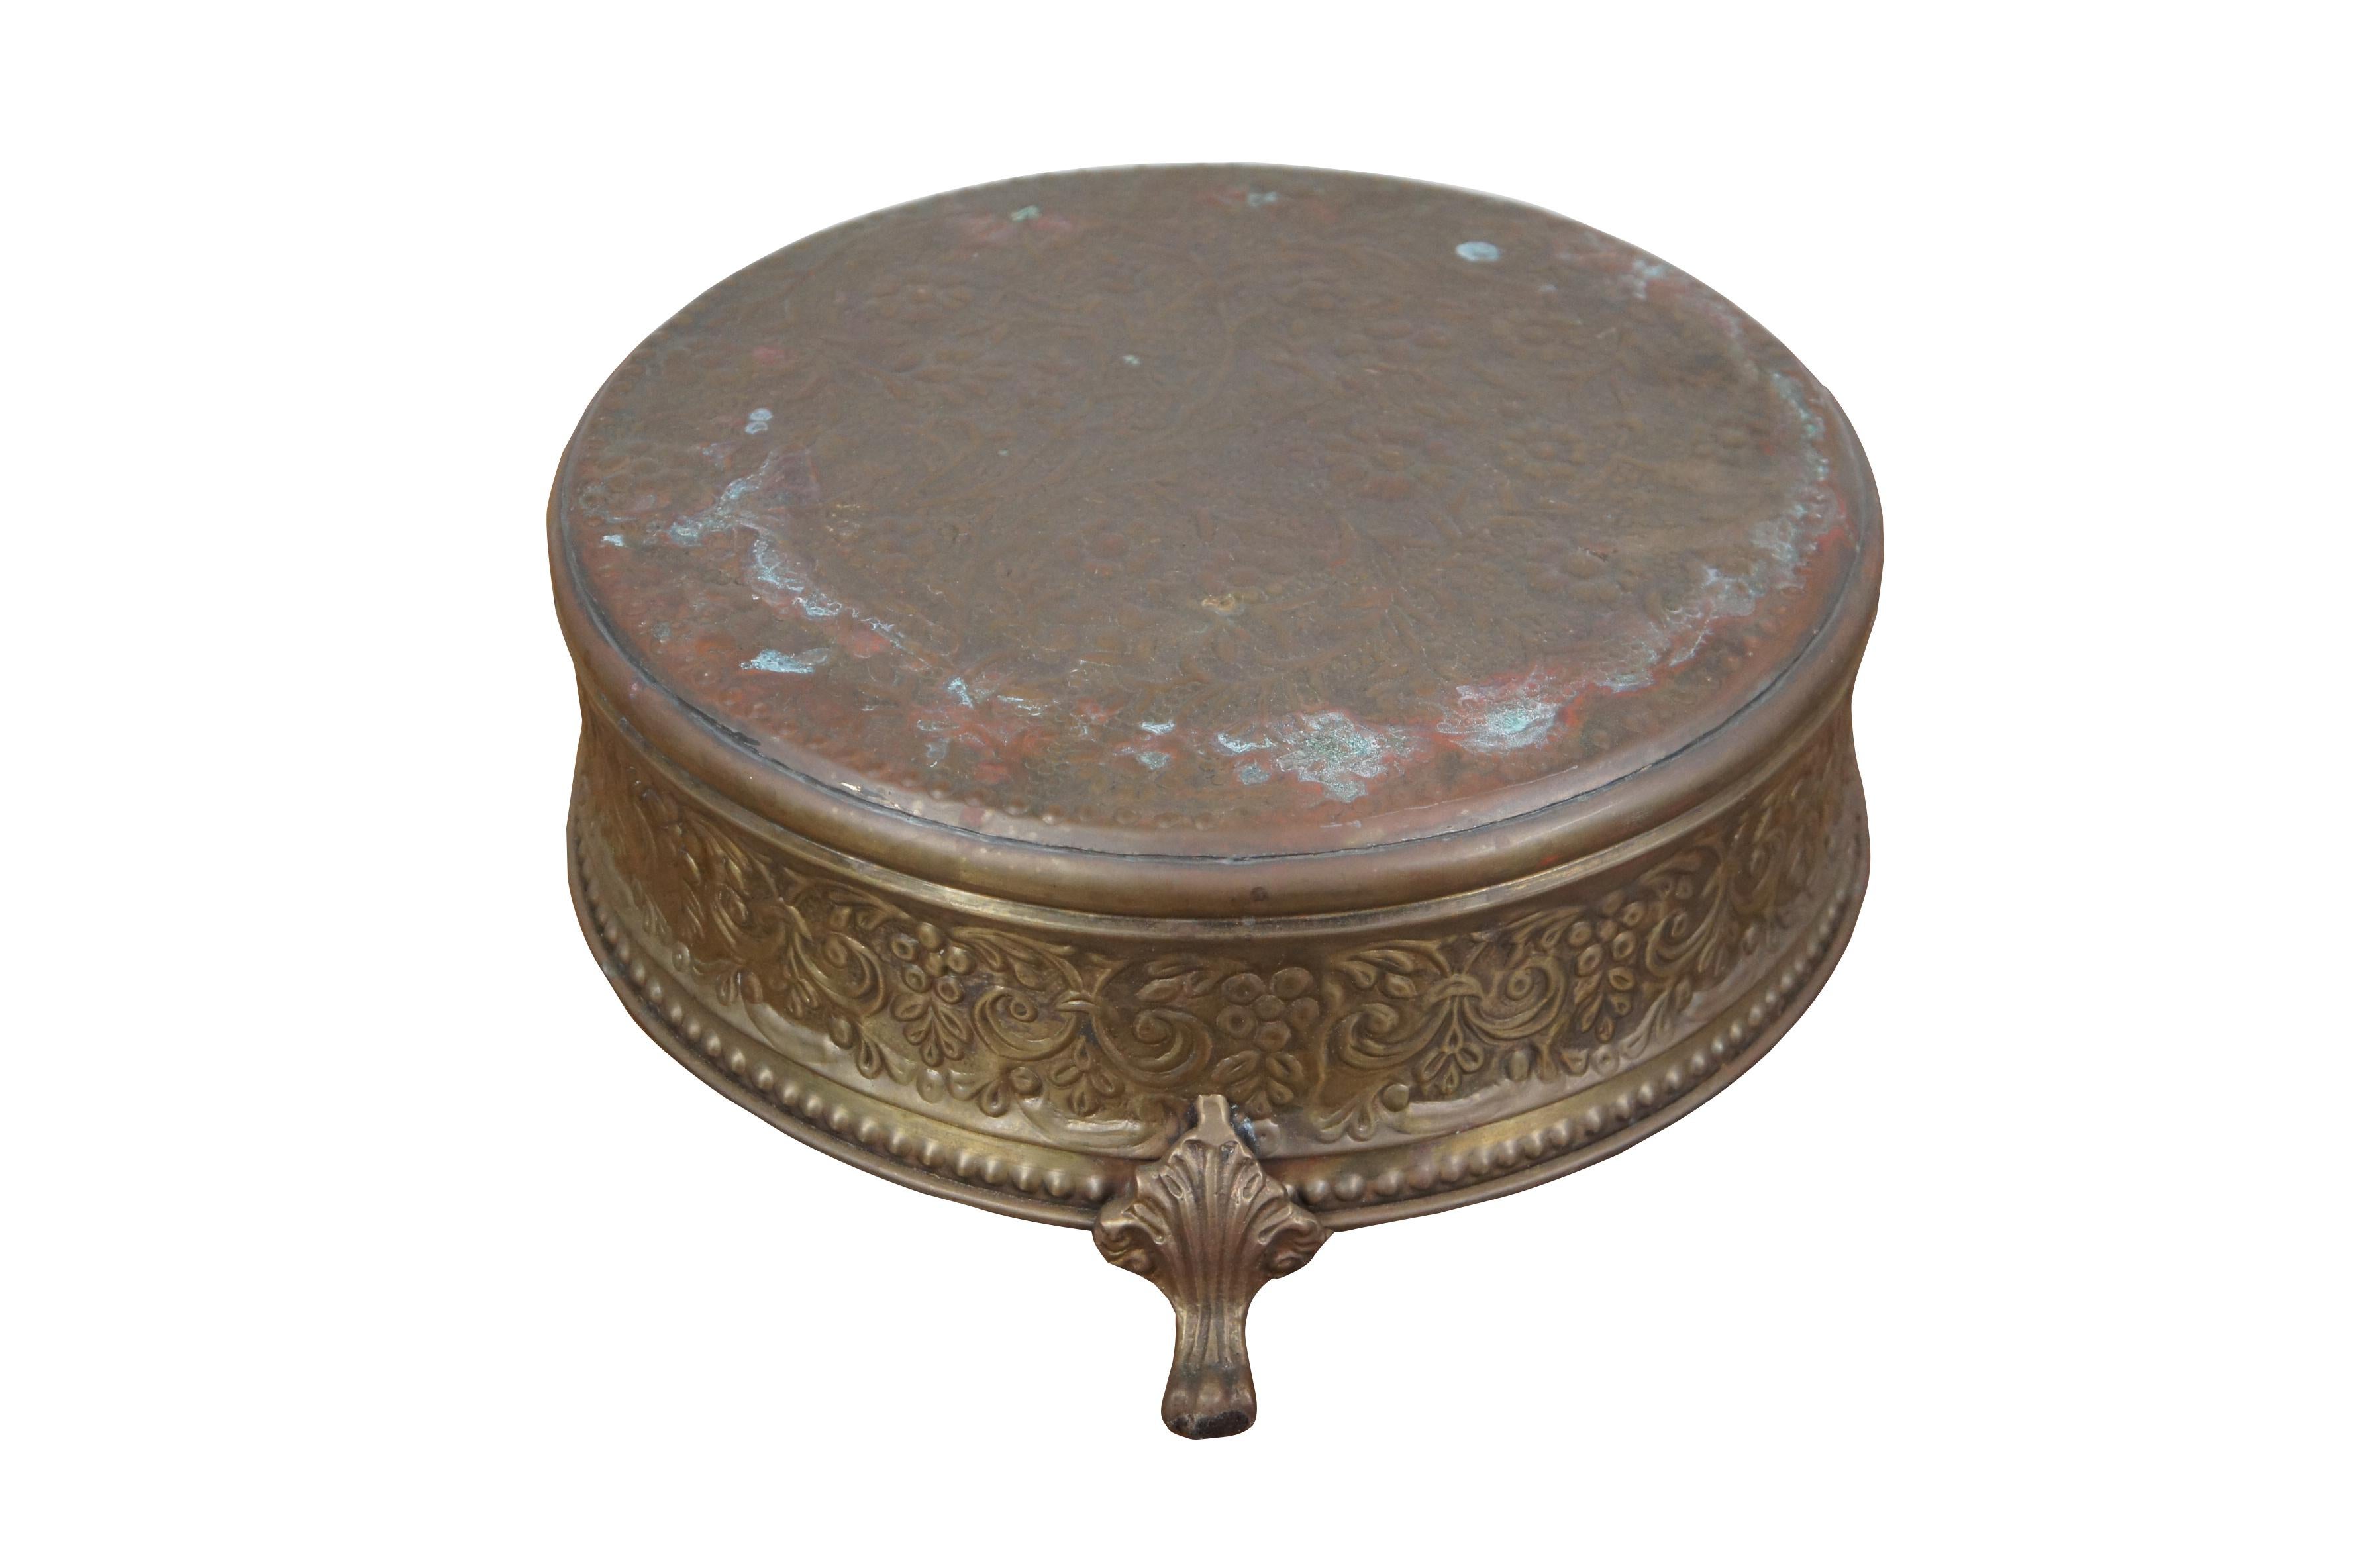 20th century round brass cake drum / cake stand / riser embossed with a floral and beaded design and footed base with scalloped paw feet.

Dimensions:
13